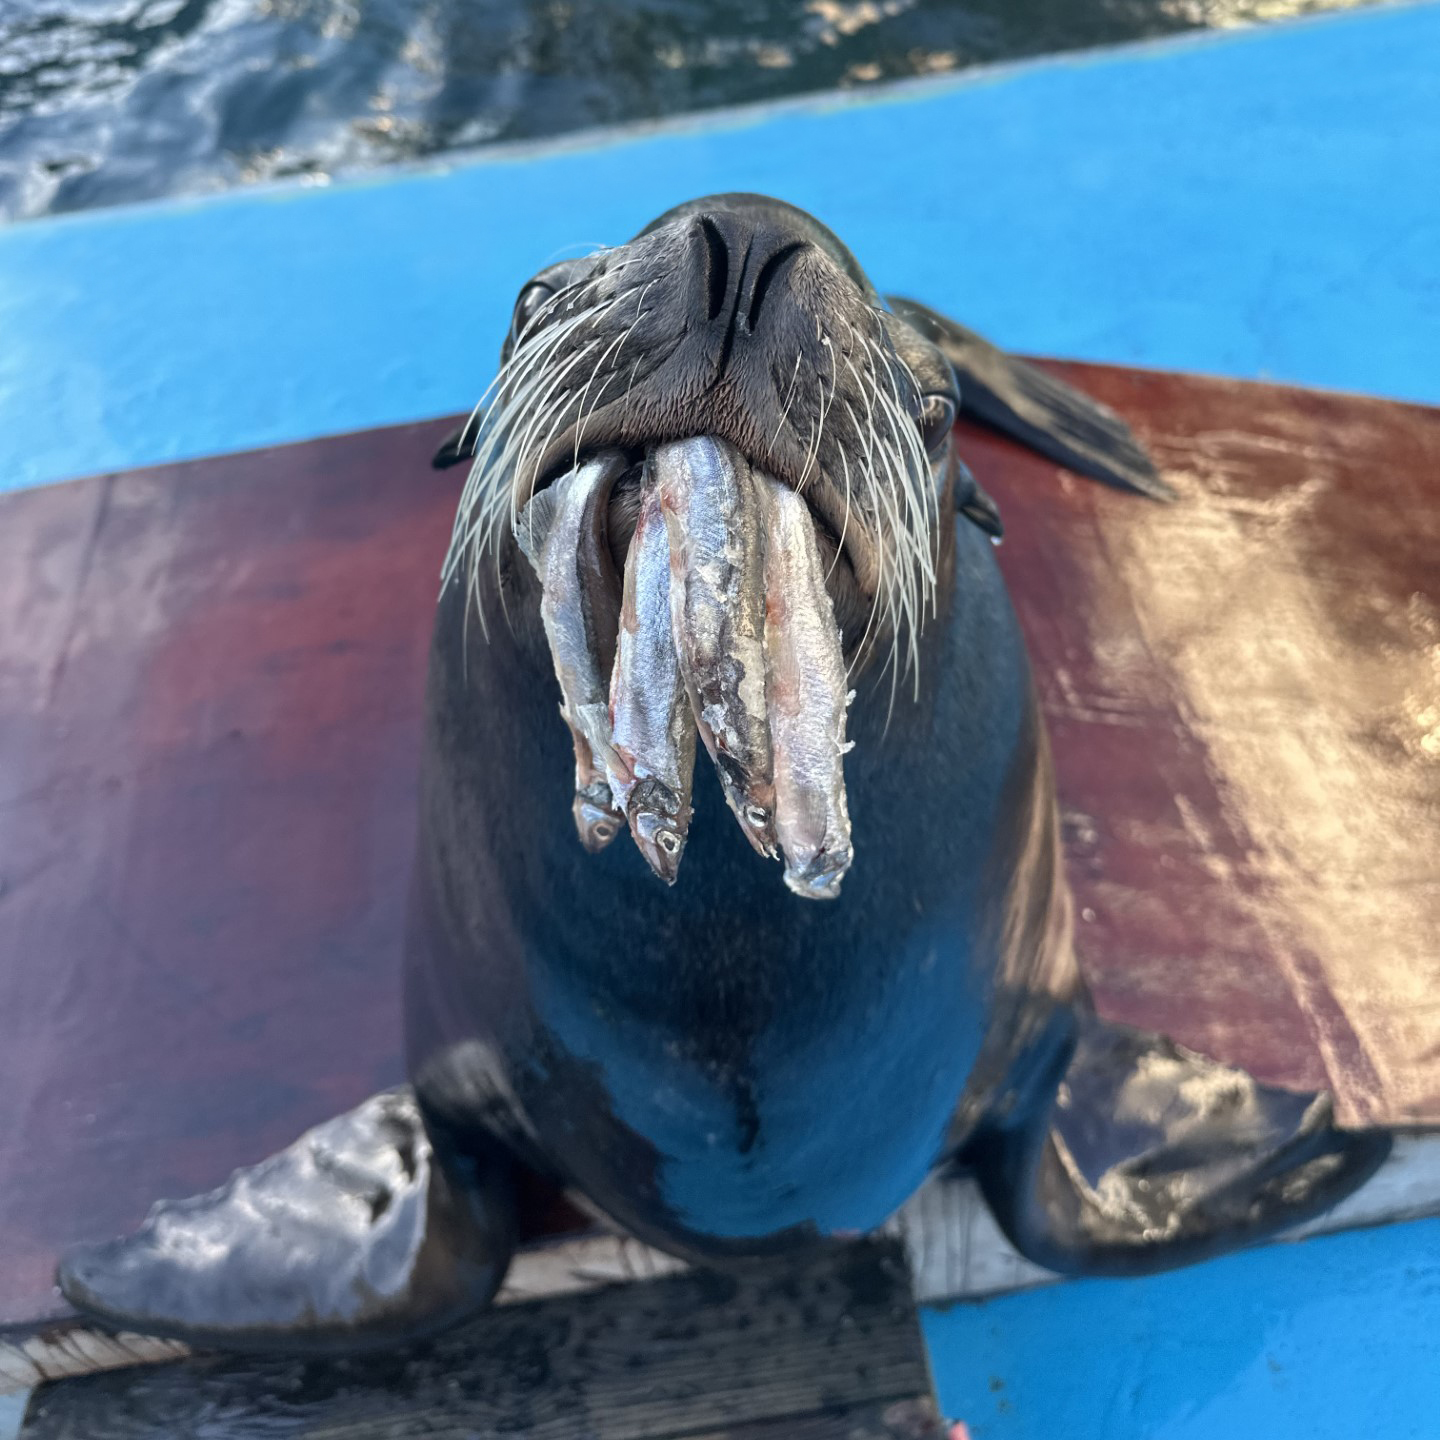 What Do Sea Lions Eat?